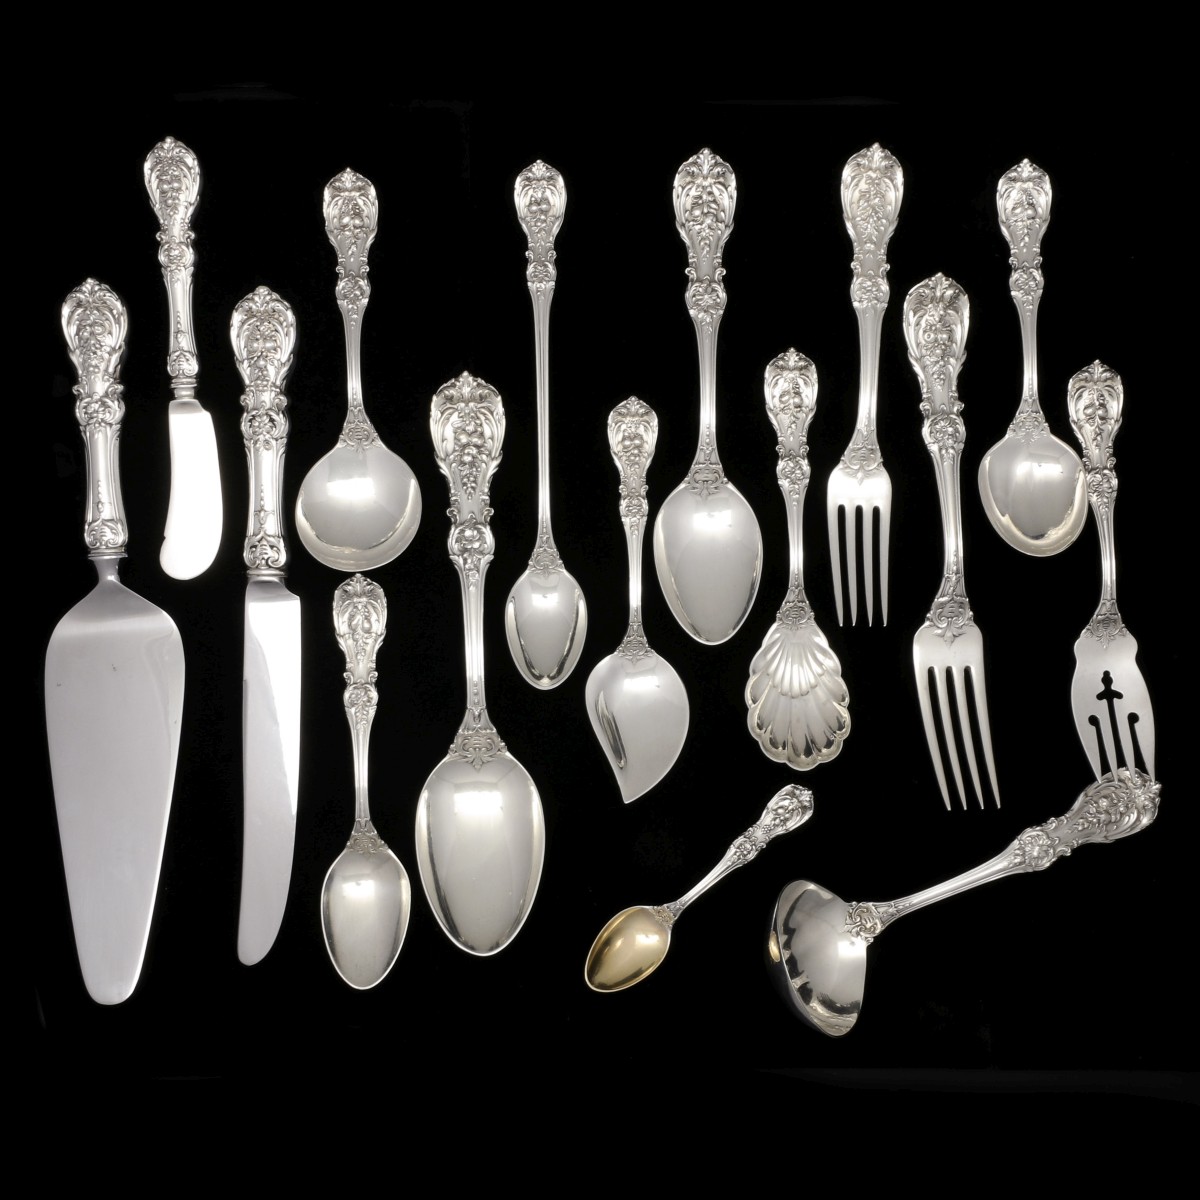 A 188-PC. FRANCIS I STERLING SILVER FLATWARE SET